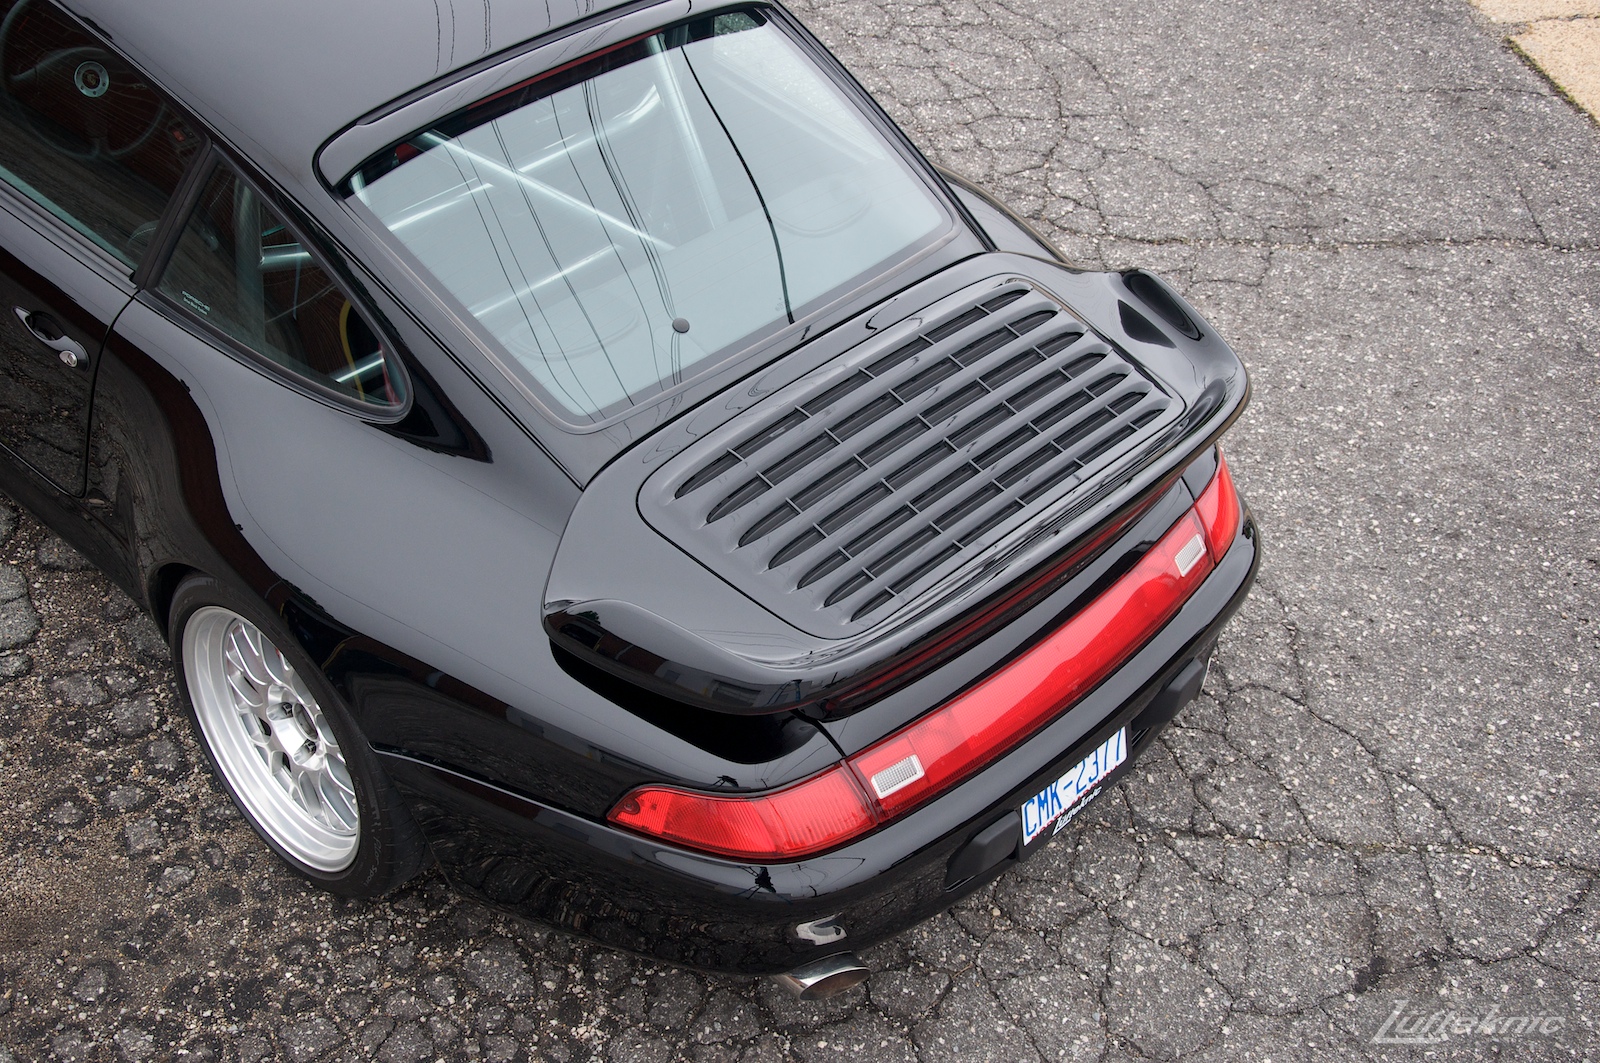 A view from above and behind a shiny black 993 Porsche Turbo in a parking lot showing rear lights and spoiler.